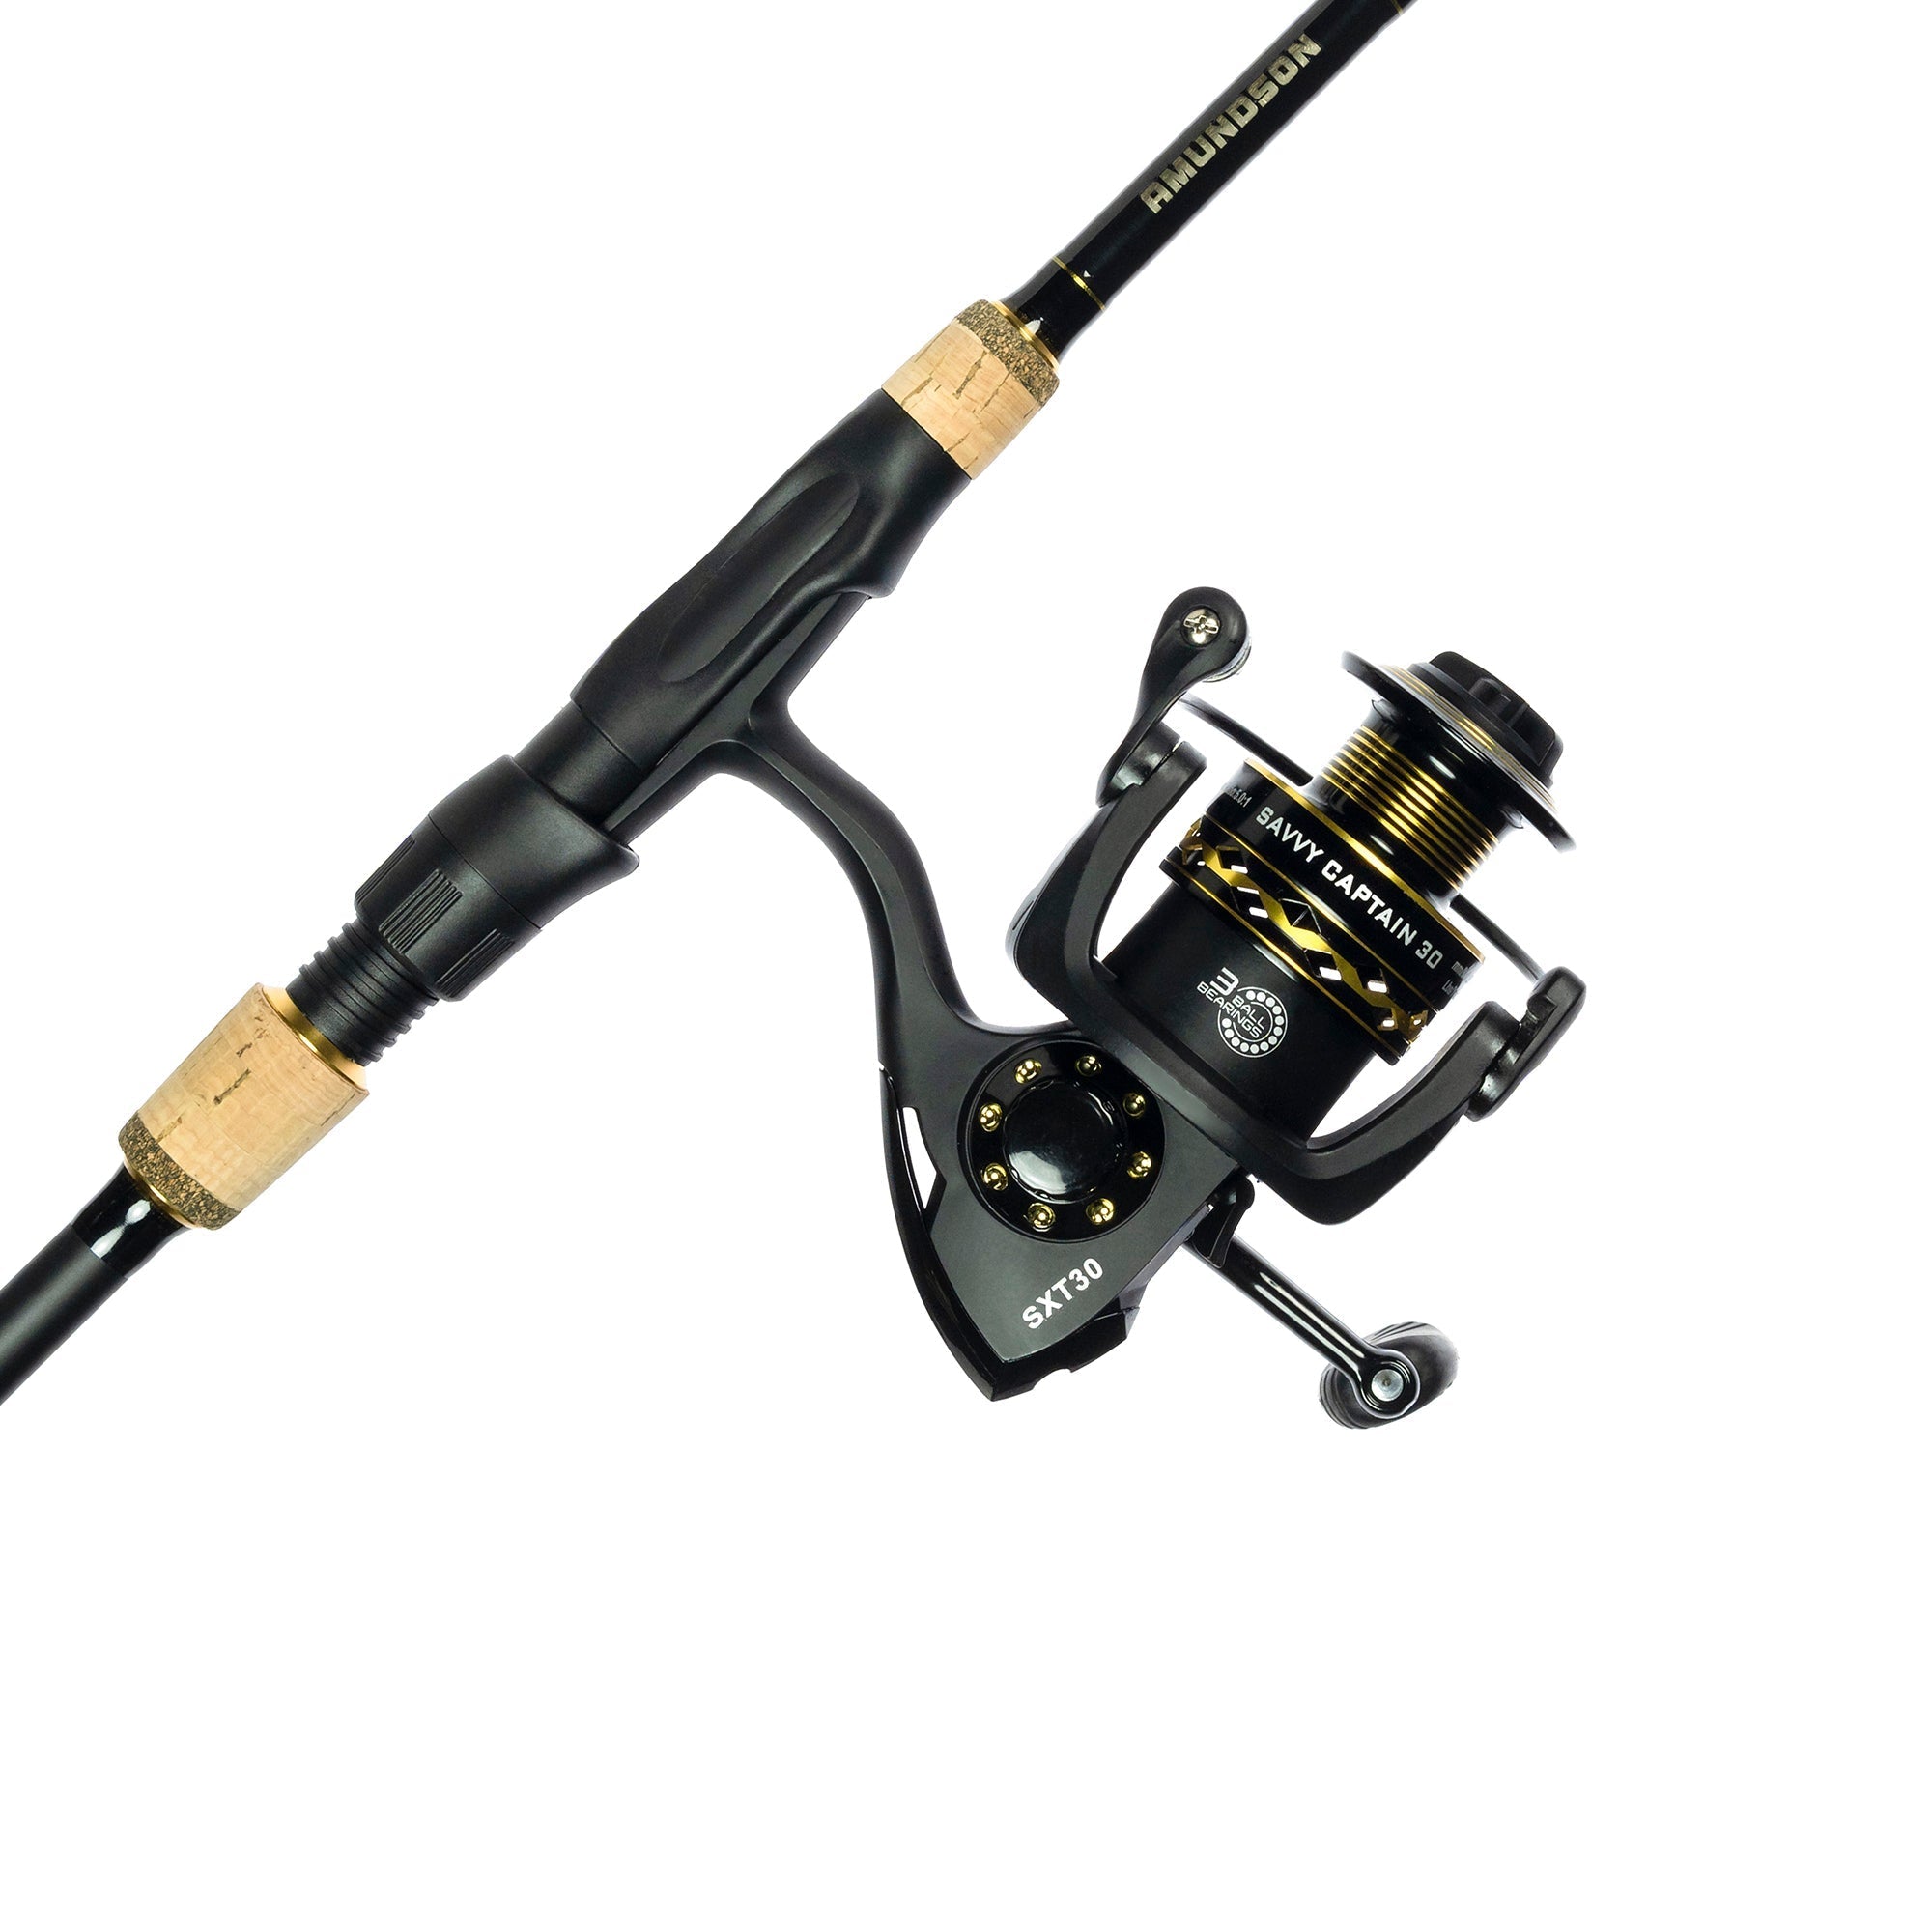 Amundson Savvy Rider Fishing Rod and Reel Combo Automatic Expansion Graphite Carbon Rod Aluminum Spool Reel Portable Travel Camping Kit All Season